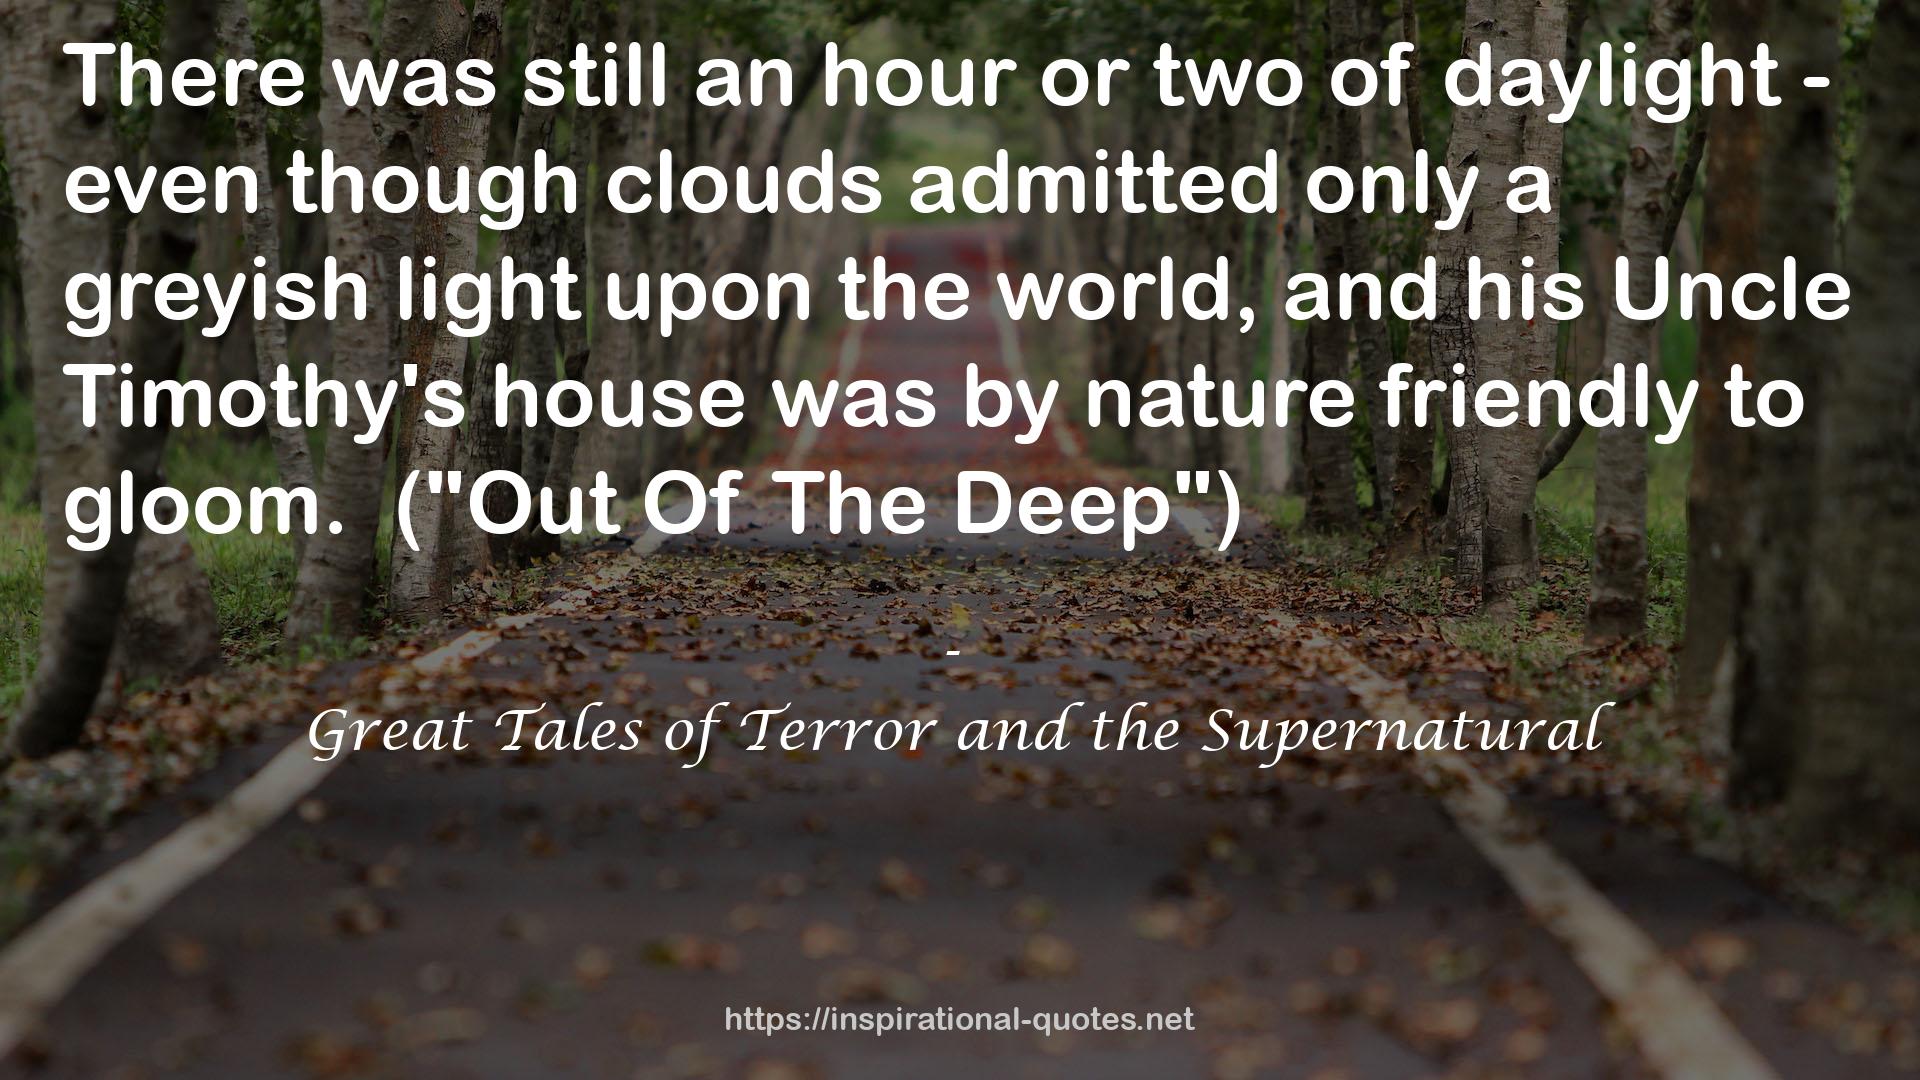 Great Tales of Terror and the Supernatural QUOTES